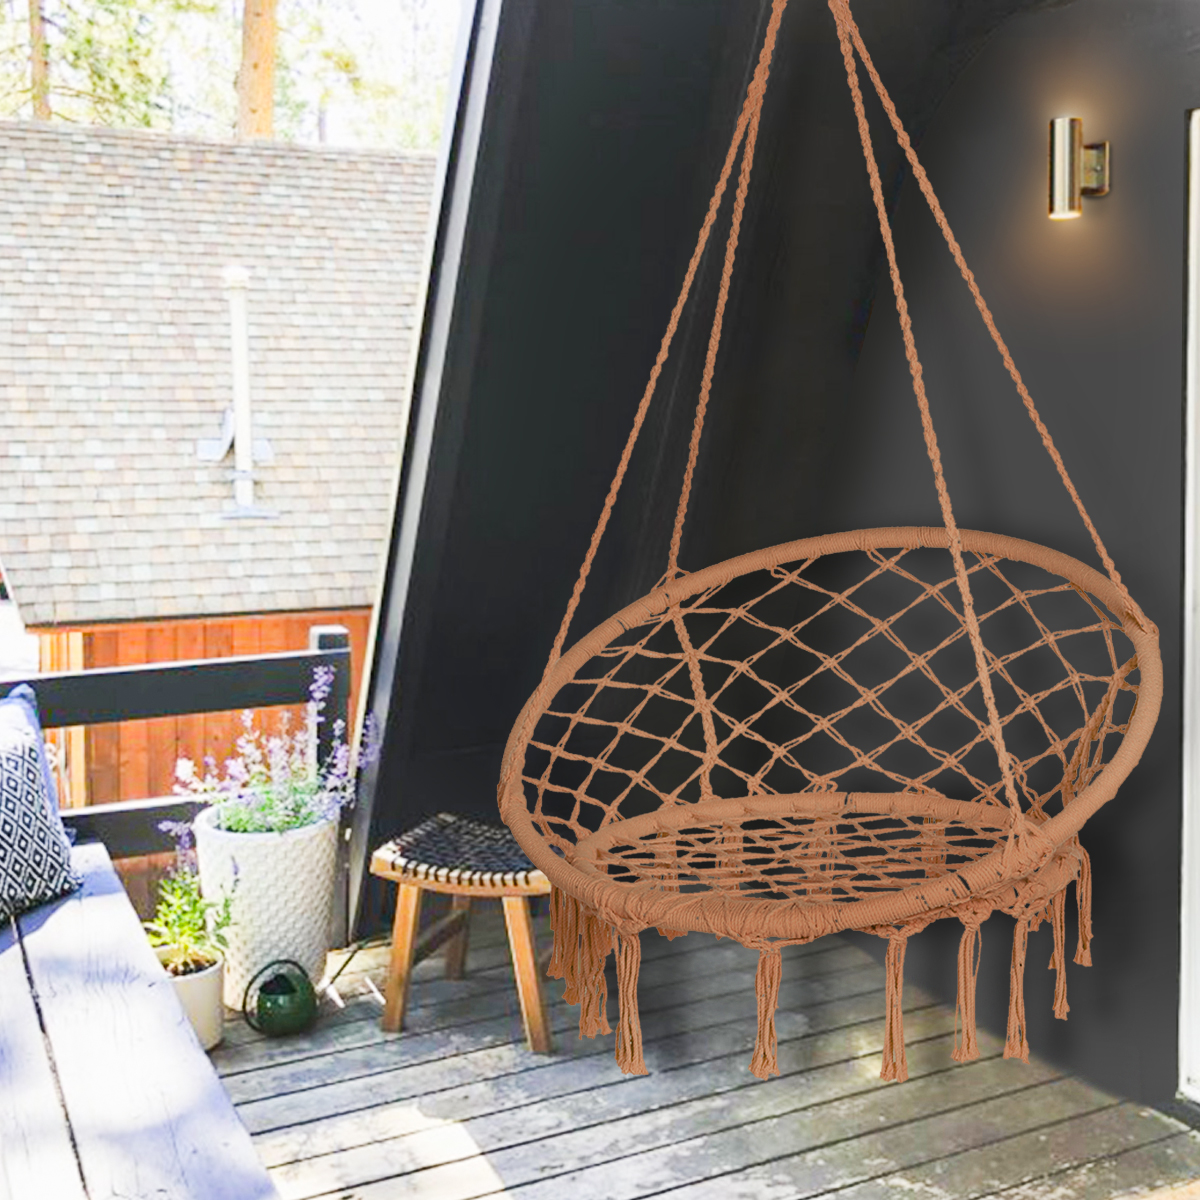 Cotton-Metal-Swing-Seat-Hanging-Chair-Hammock-Max-Load-240kg-for-Outdoor-Garden-Camping-1826564-11